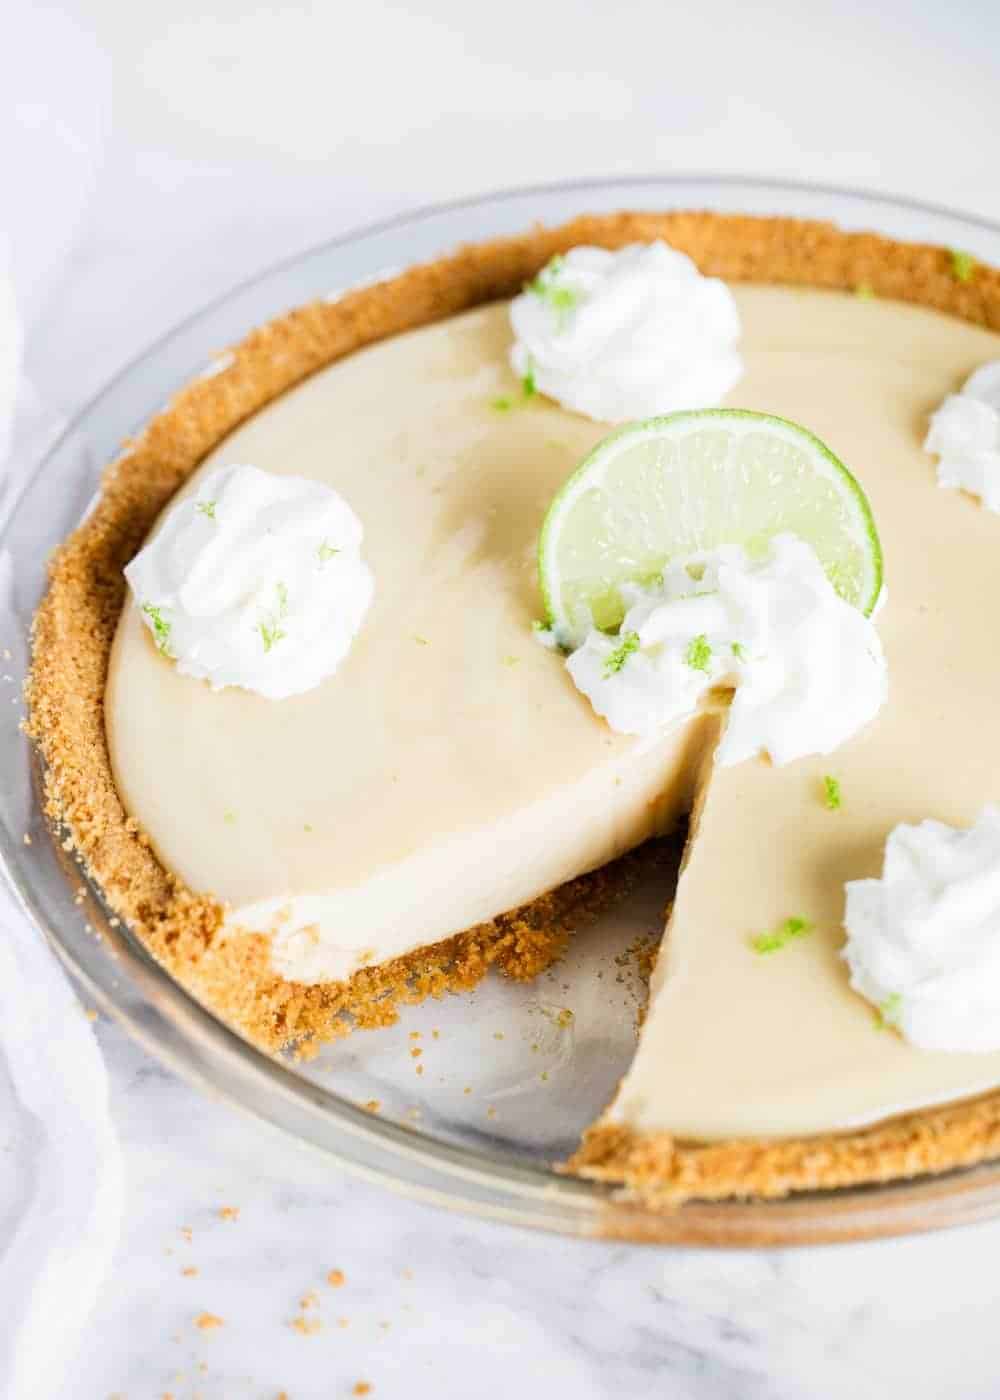 Key lime pie with a slice removed.